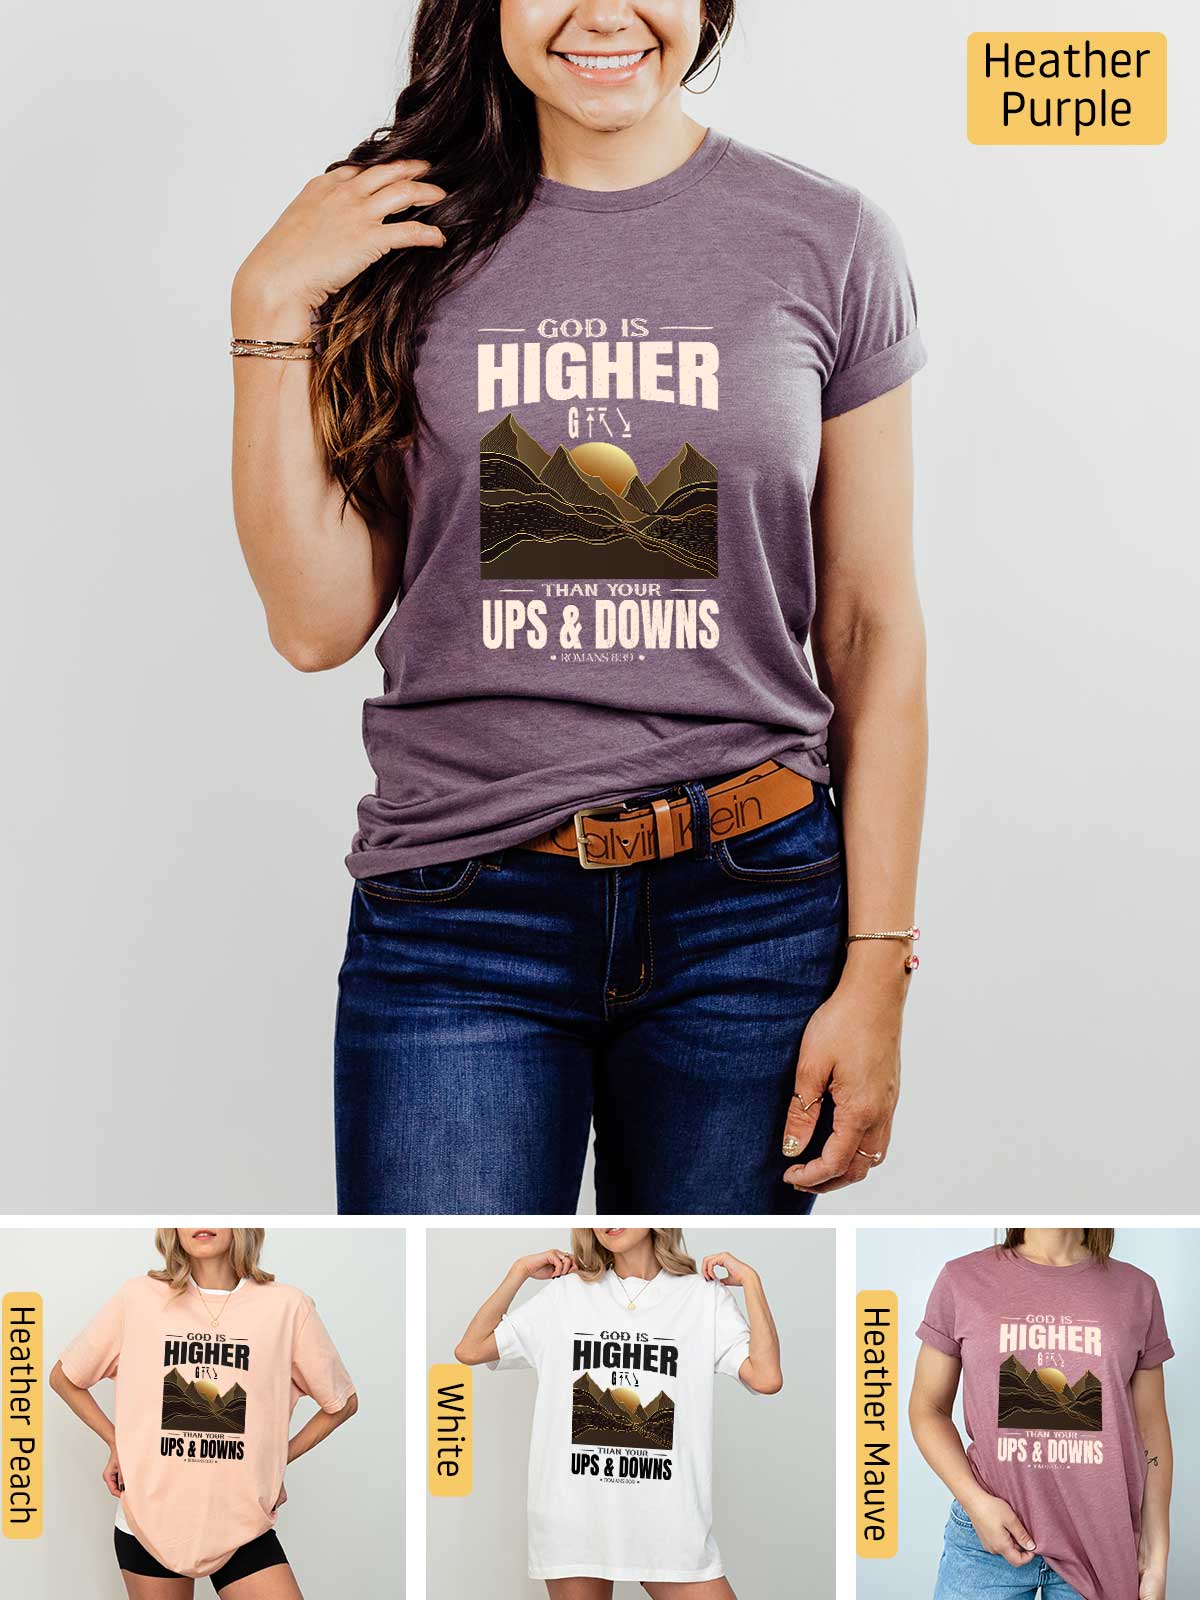 a woman wearing a t - shirt that says higher is higher ups and downs